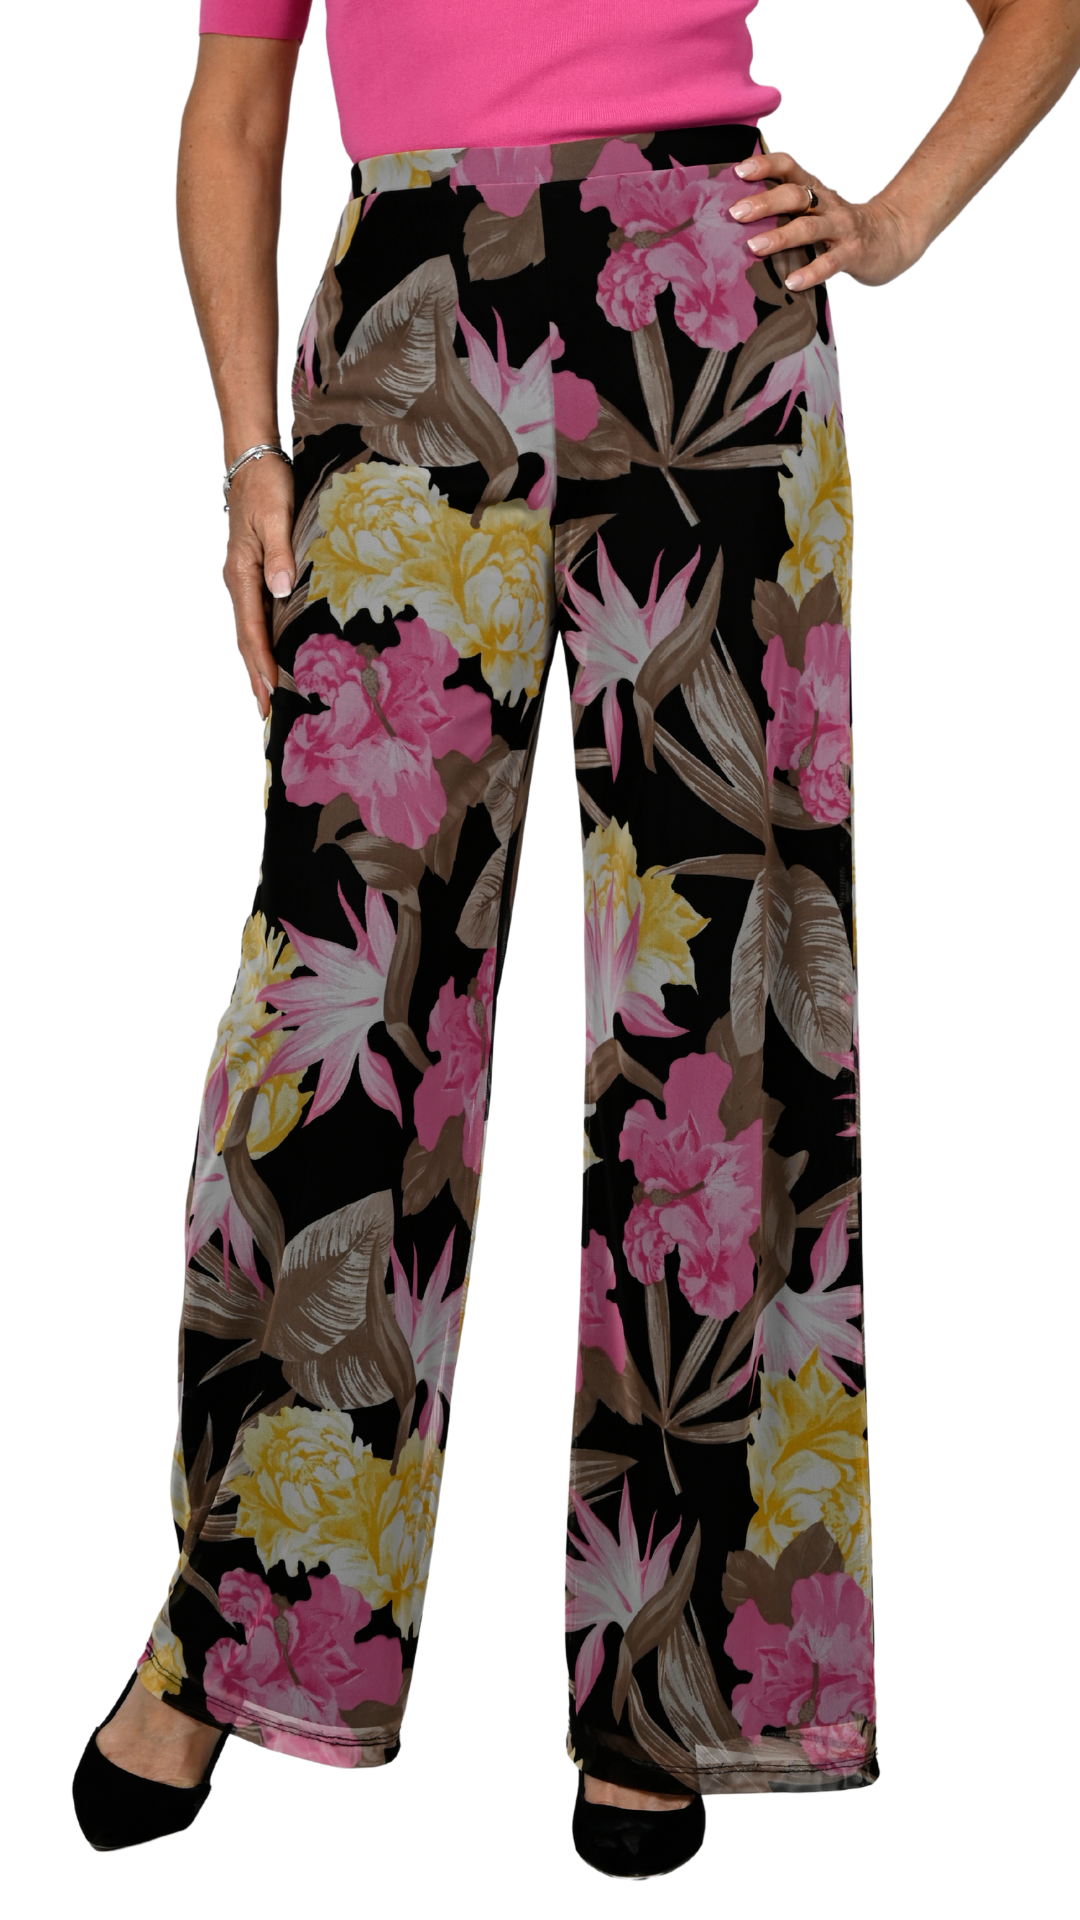 Pull On Sheer Floral Stretch Pant. Style FL236454